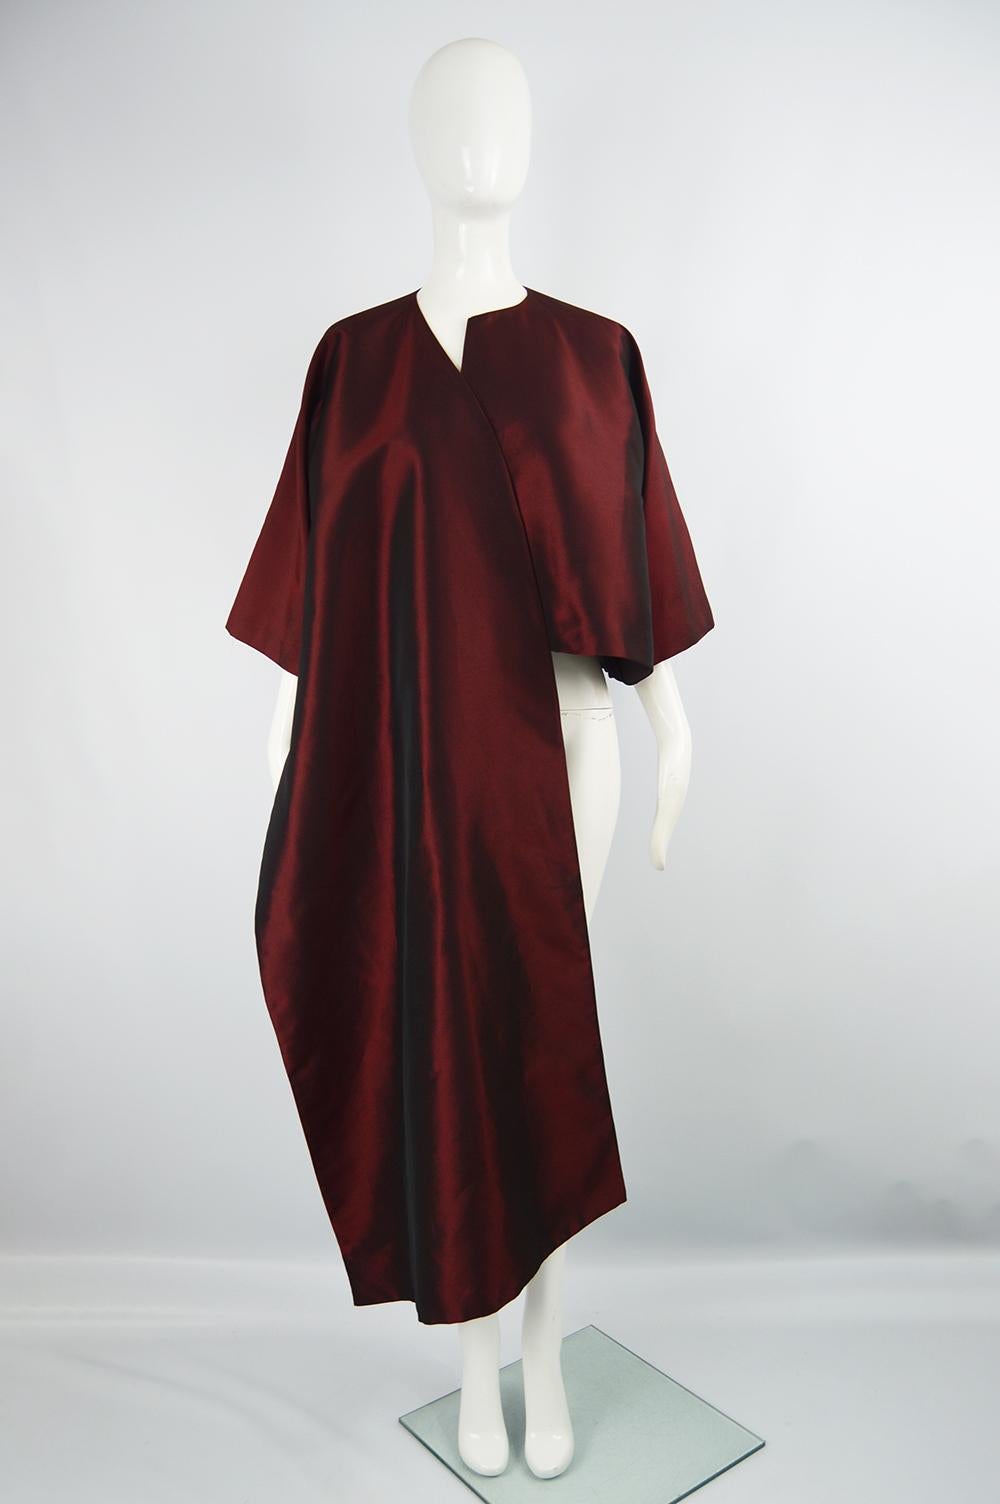 A sculptural vintage Gianfranco Ferre evening jacket from the 90s. In a red taffeta with an asymmetrical, open front design and short sleeves, creating a look that is perfect for layering or at a formal party. 

Size: Marked IT 42 but one size fits